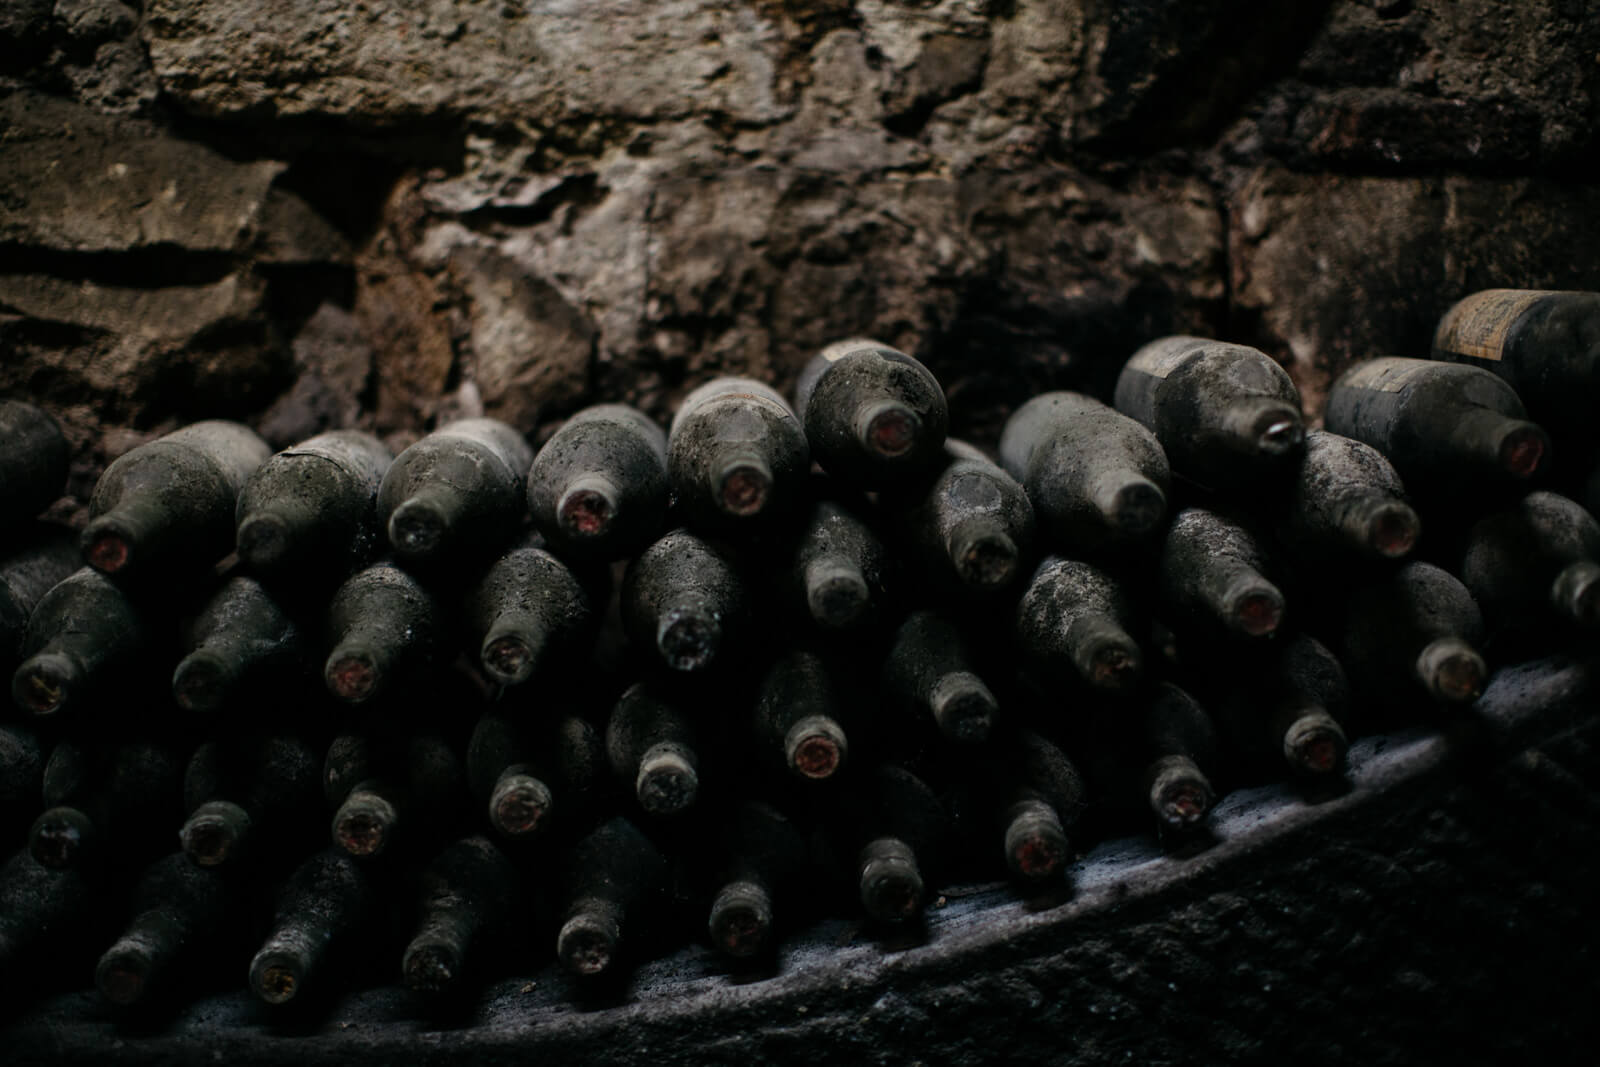 Old wine bottles covered in dusty